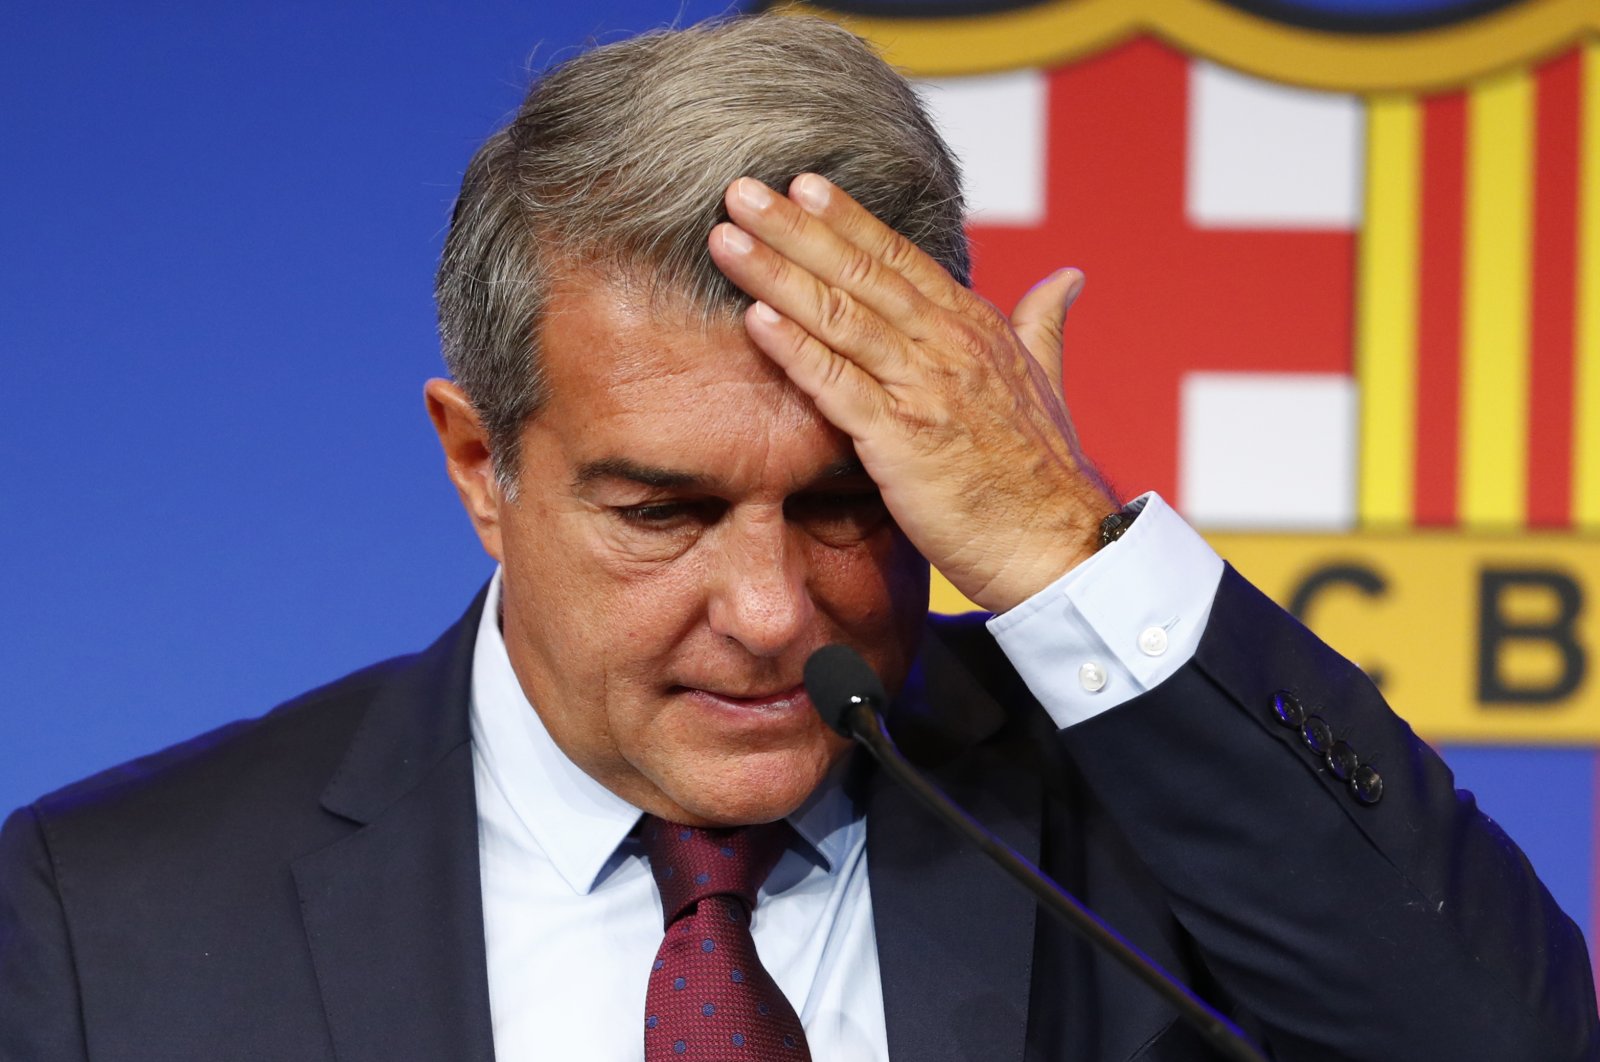 Barcelona club President Joan Laporta begins a news conference in Barcelona, Spain, Friday, Aug. 6, 2021. (AP Photo)